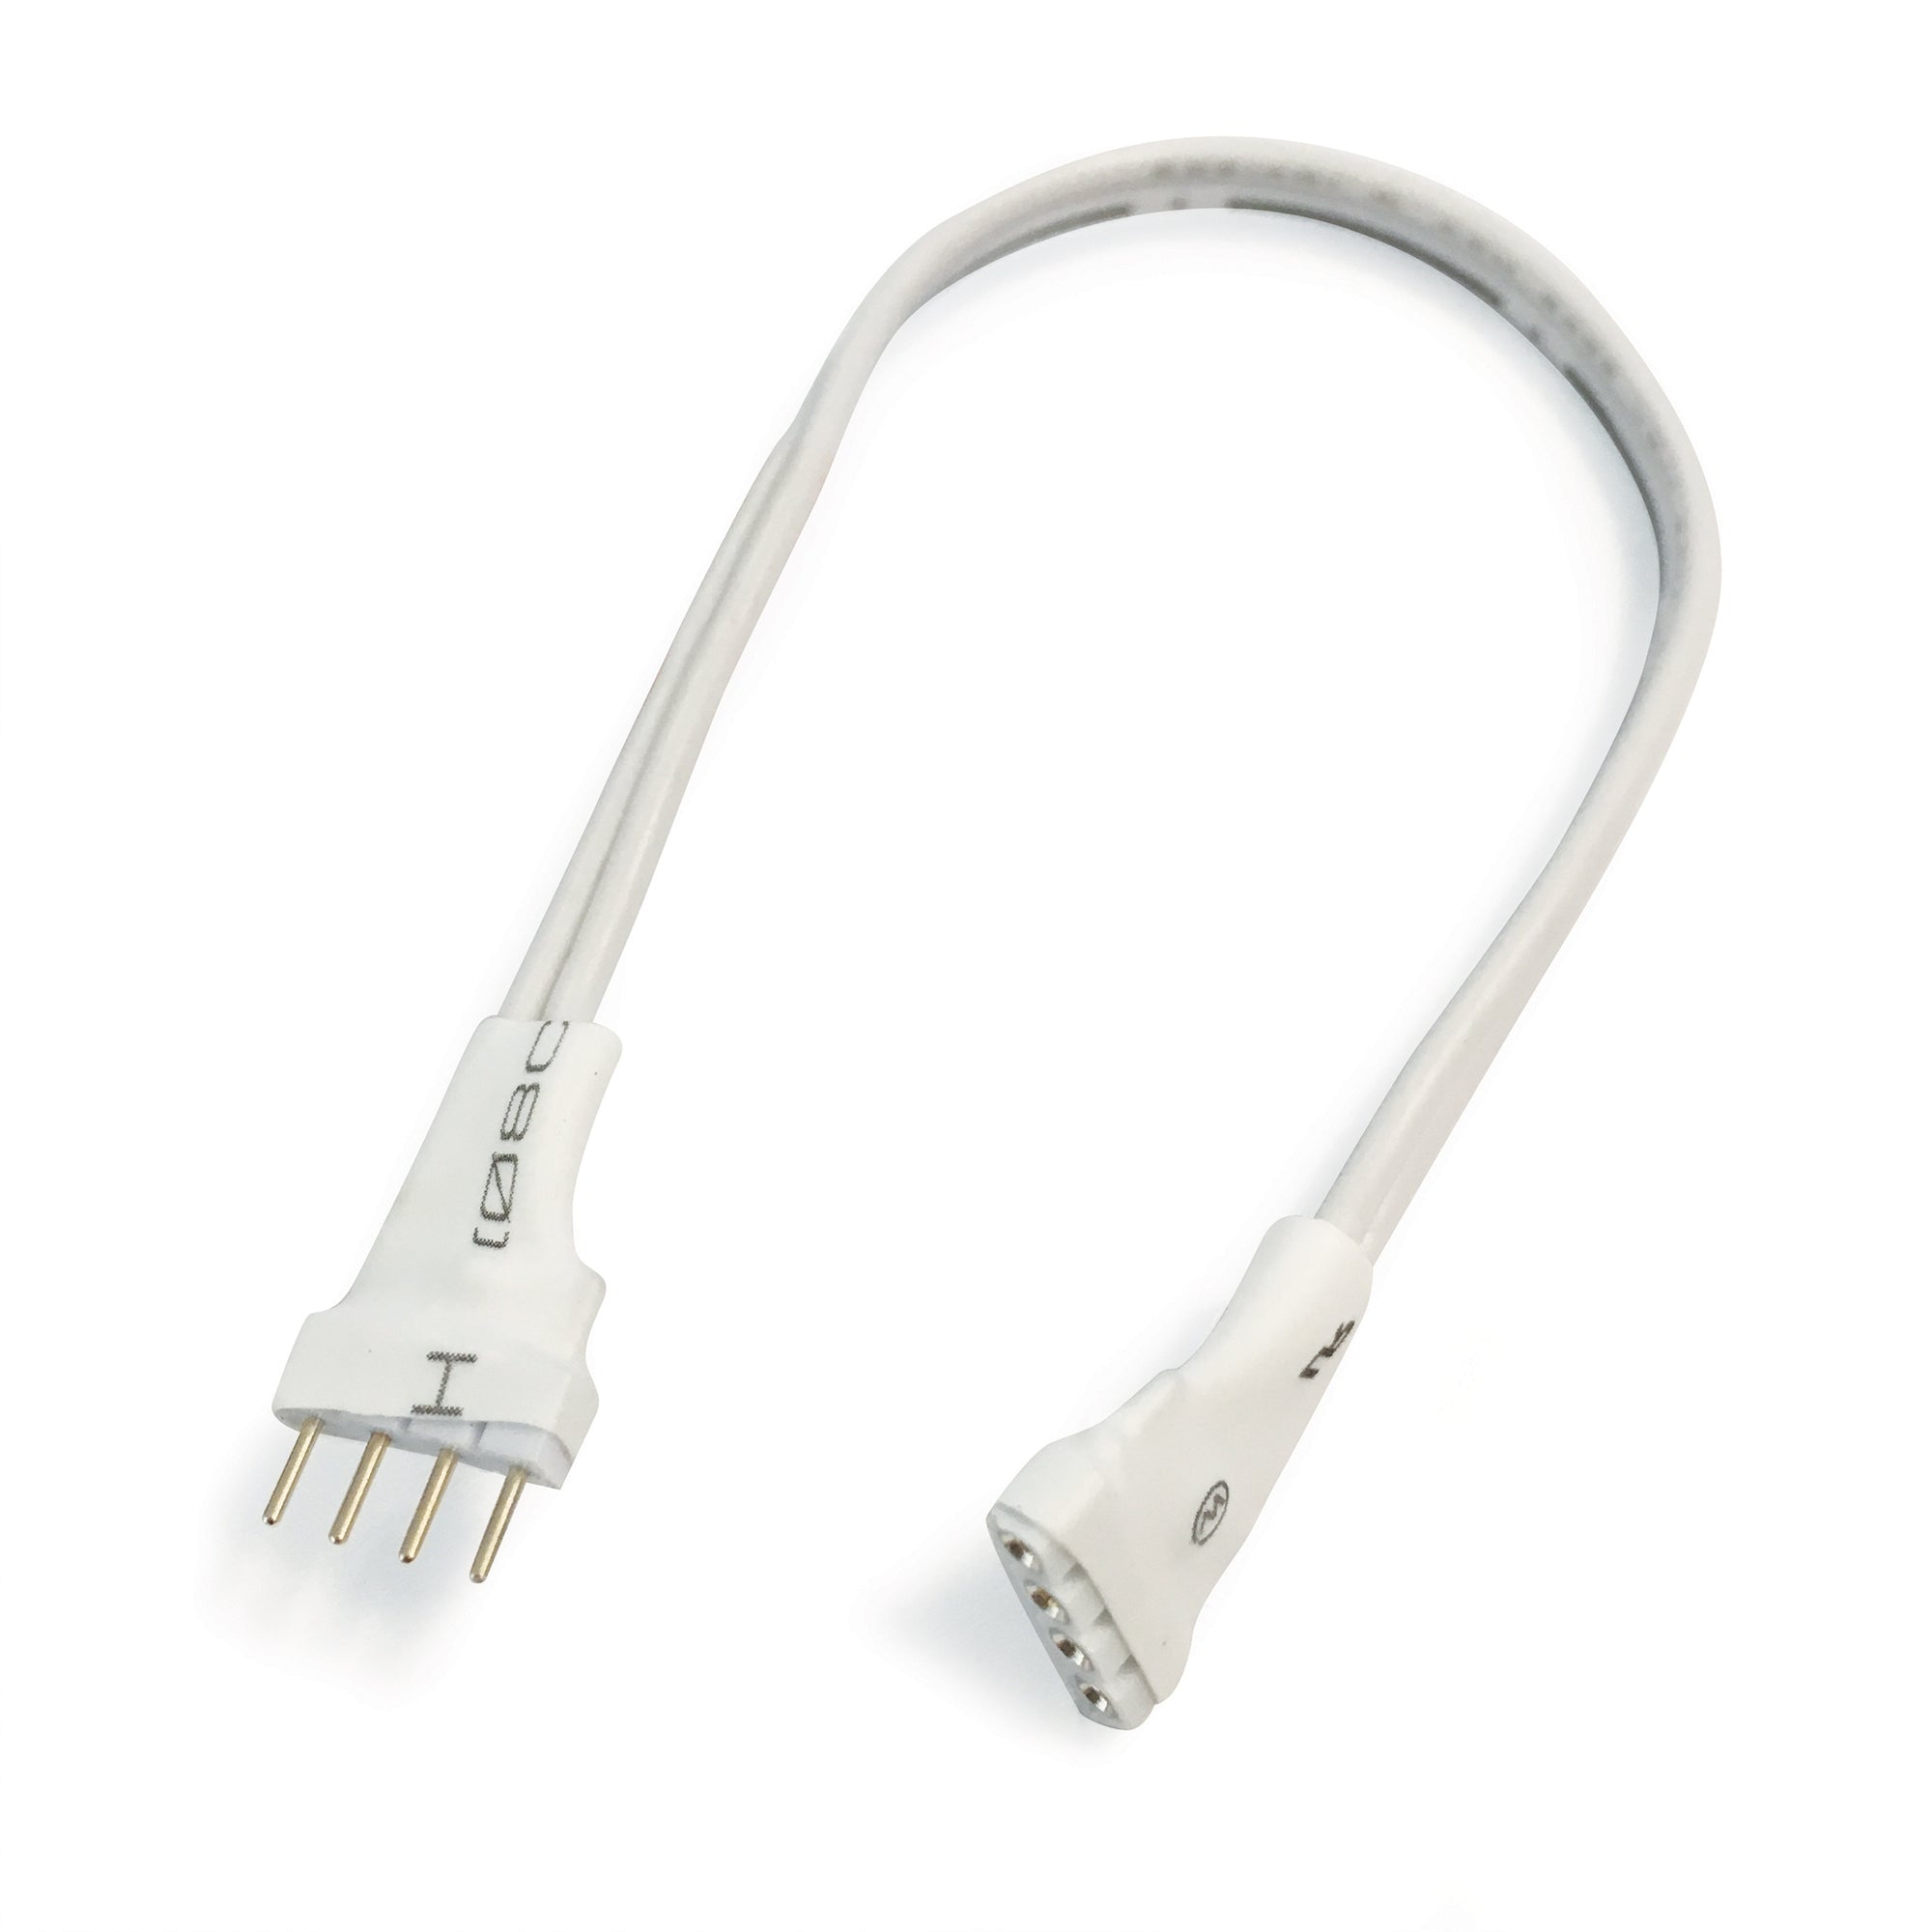 Nora Lighting NARGBW-906W 6" Interconnection Cable For RGBW Tape Light - White